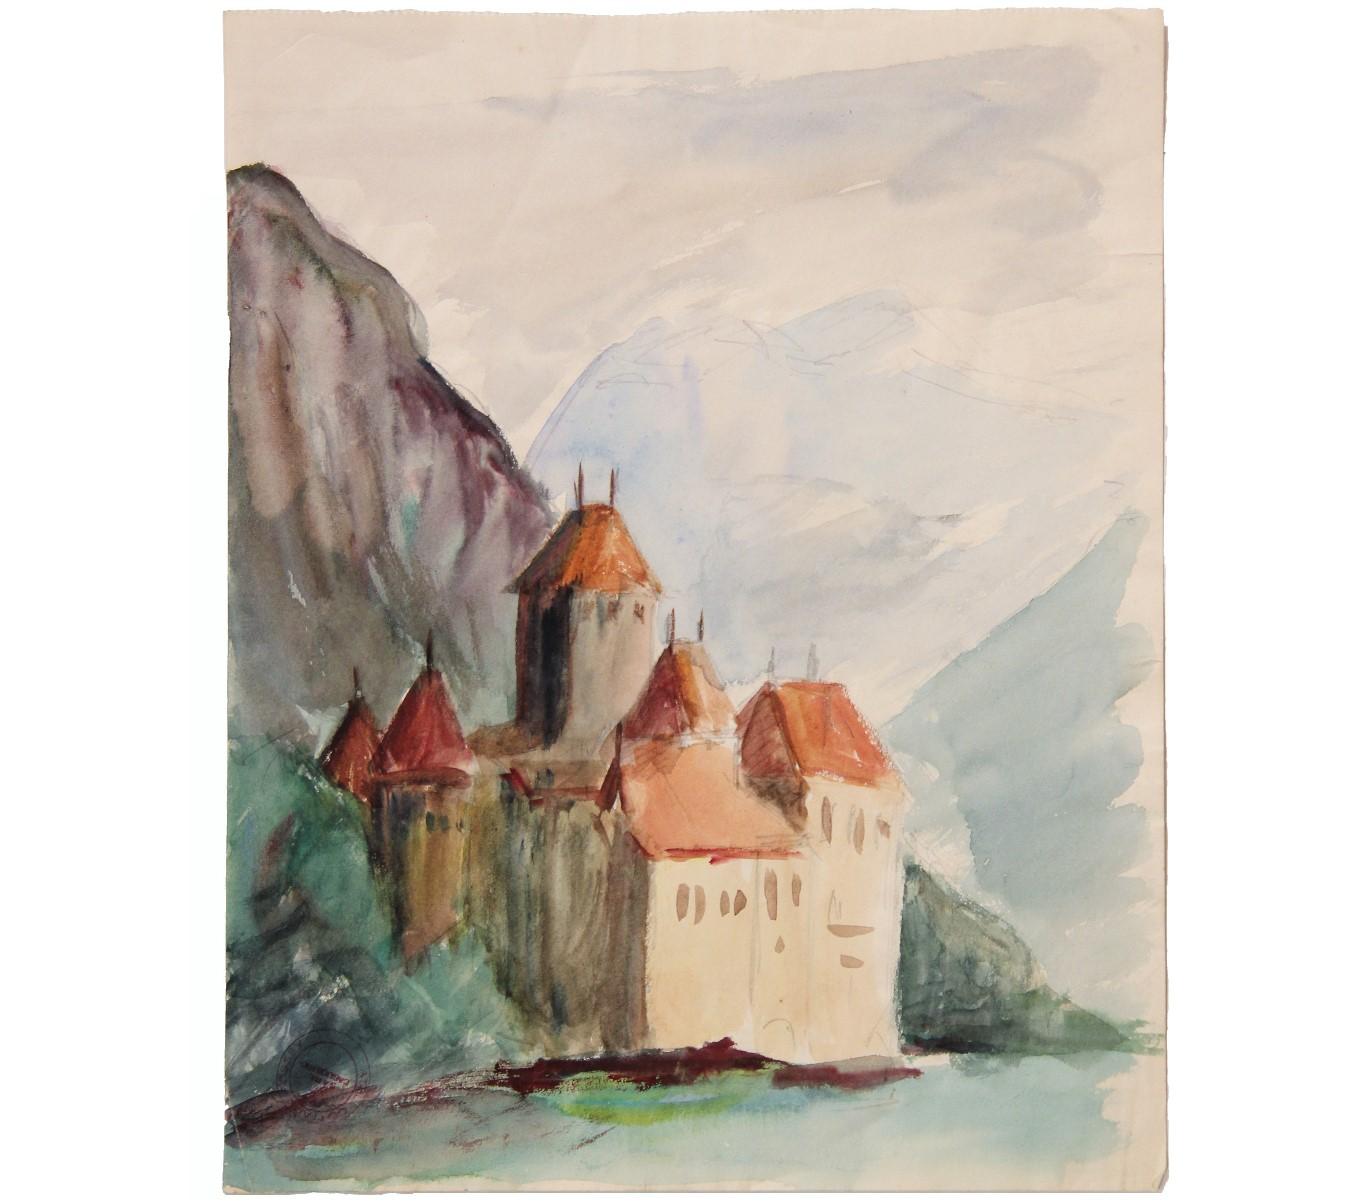 Watercolor landscape painting with a Castle looking over a lake. The work has an artist stamp in the bottom corner. The paper is not framed. Louise-Jeanne Cottard Fossey was a French artist born in 1902 and died in 1983. She was known for painting